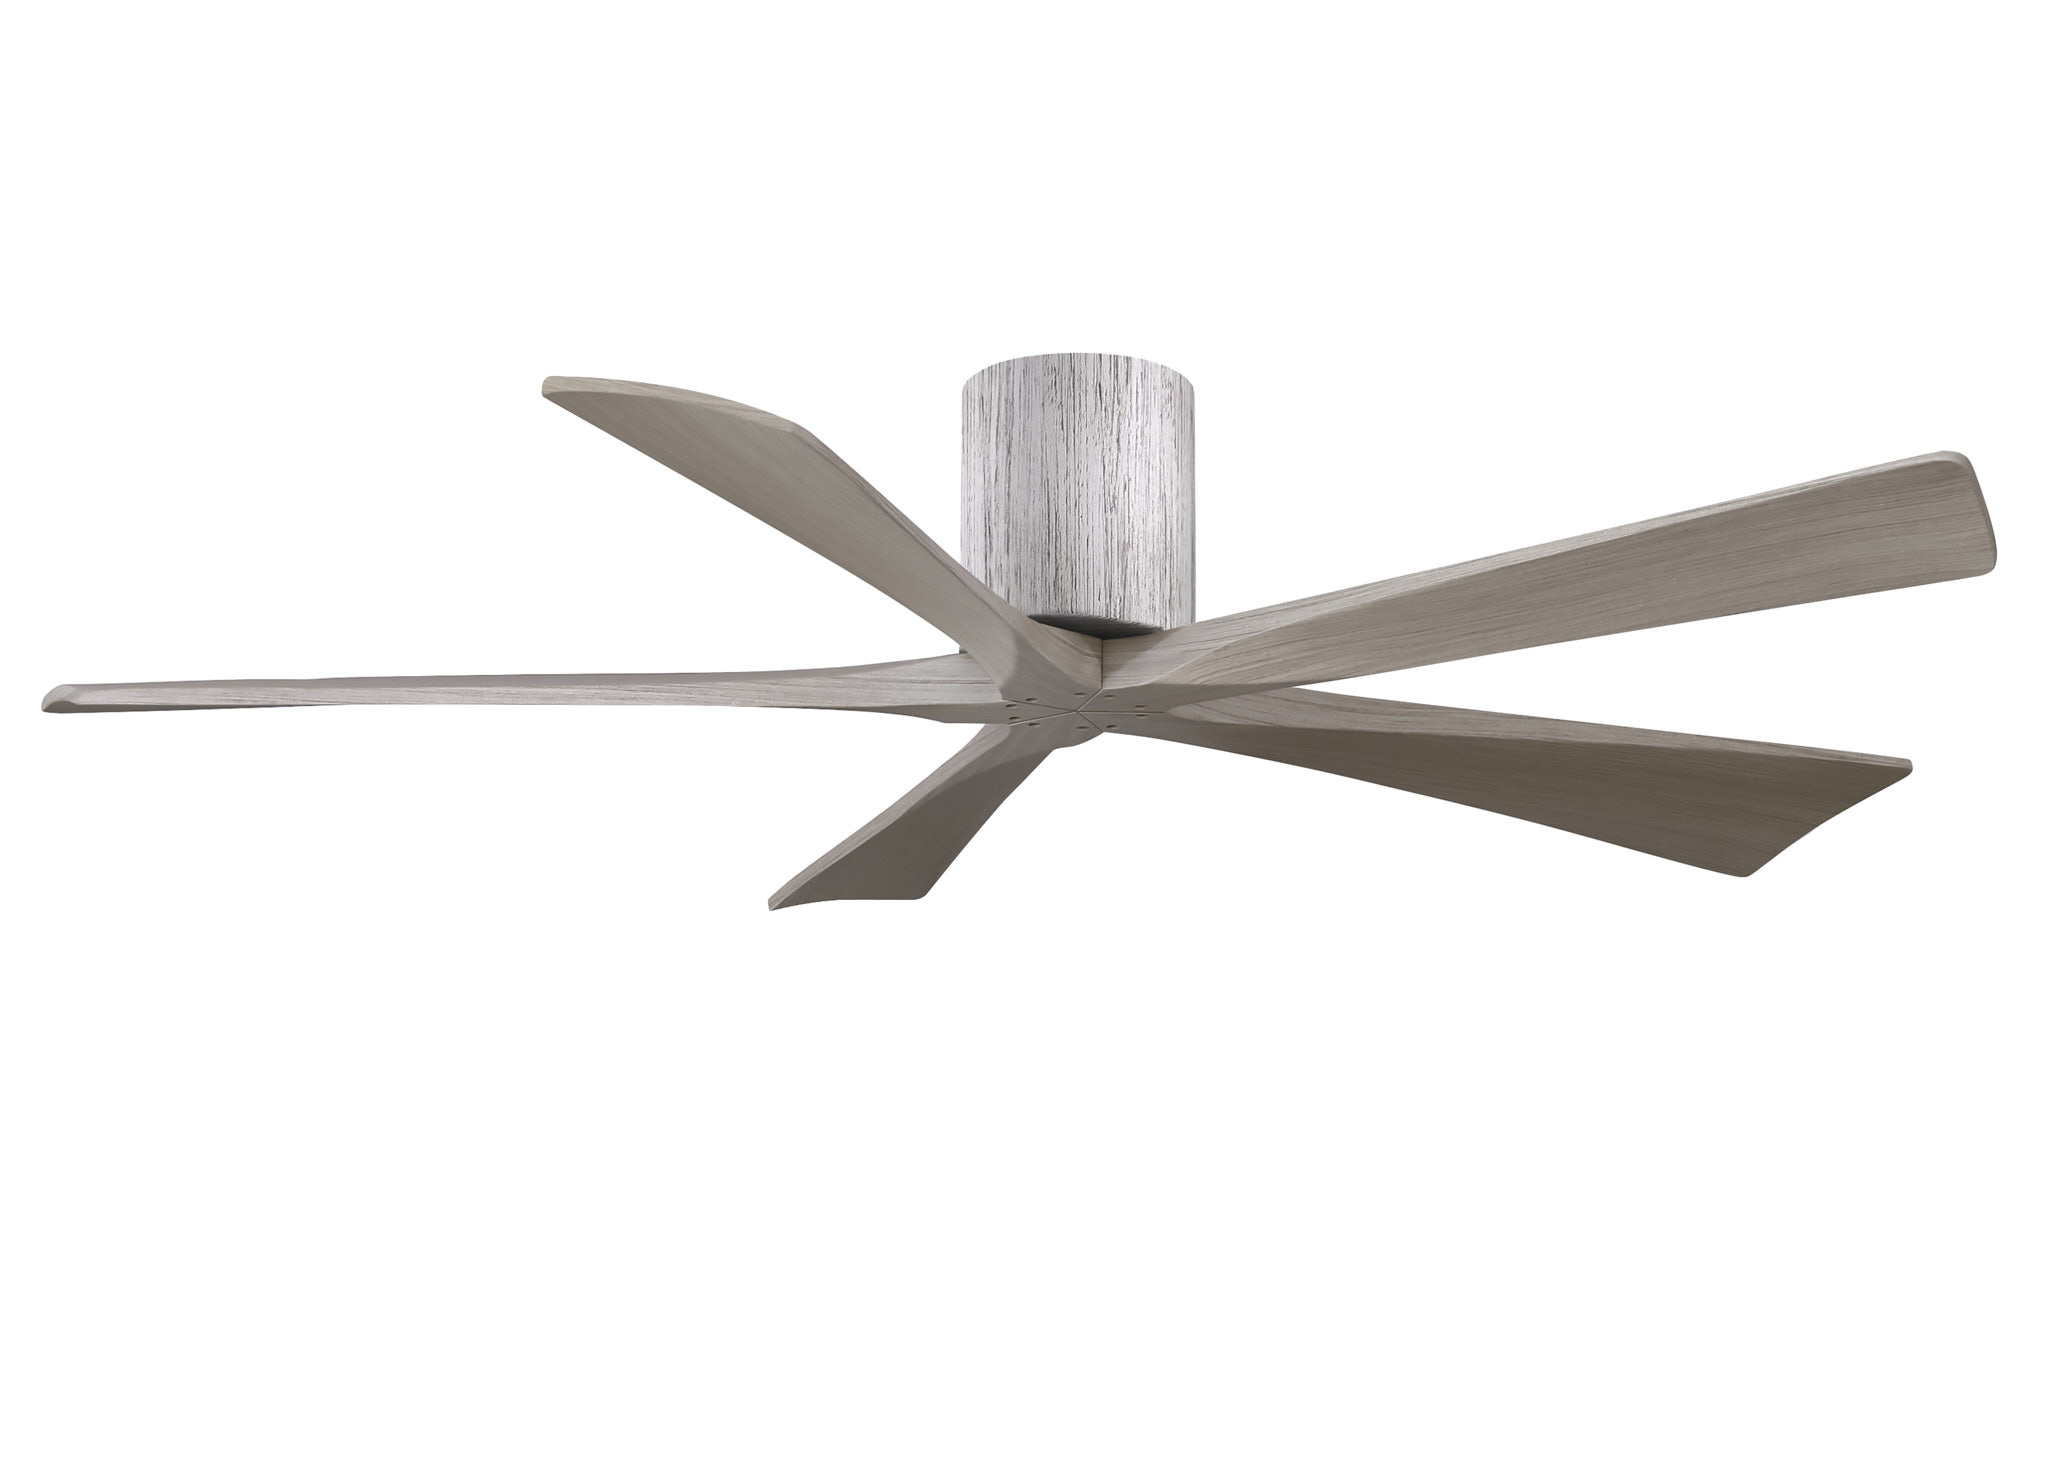 Irene-5H 6-speed ceiling fan in barn wood finish with 60